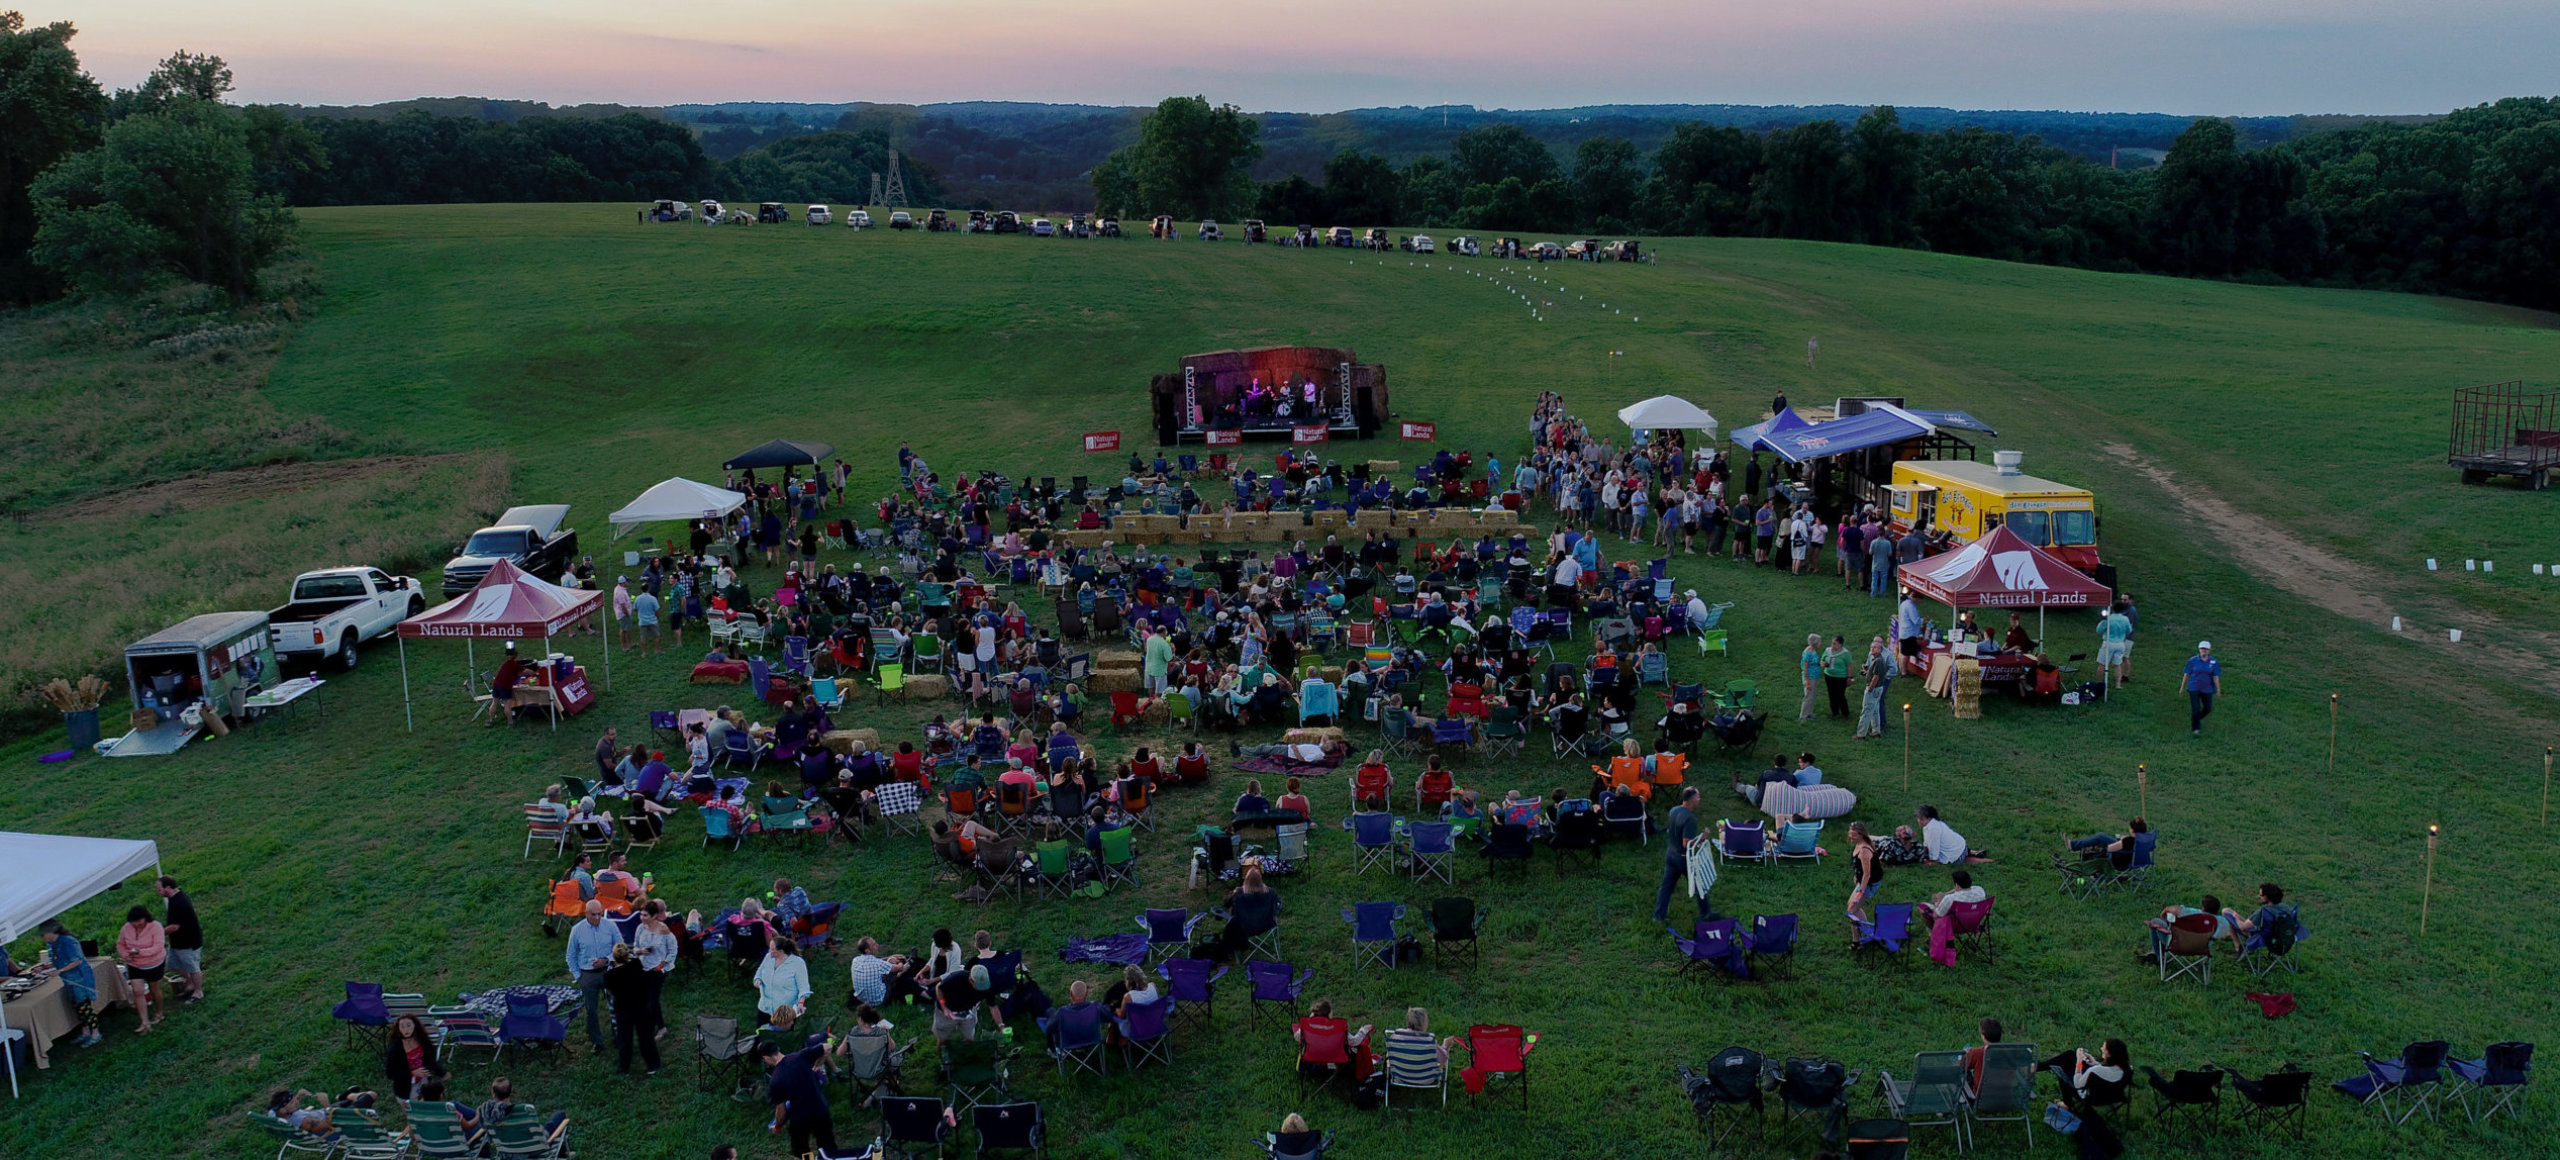 A drone shot of an outdoors concert where the audience sits on champing chairs in a green field during sunset.